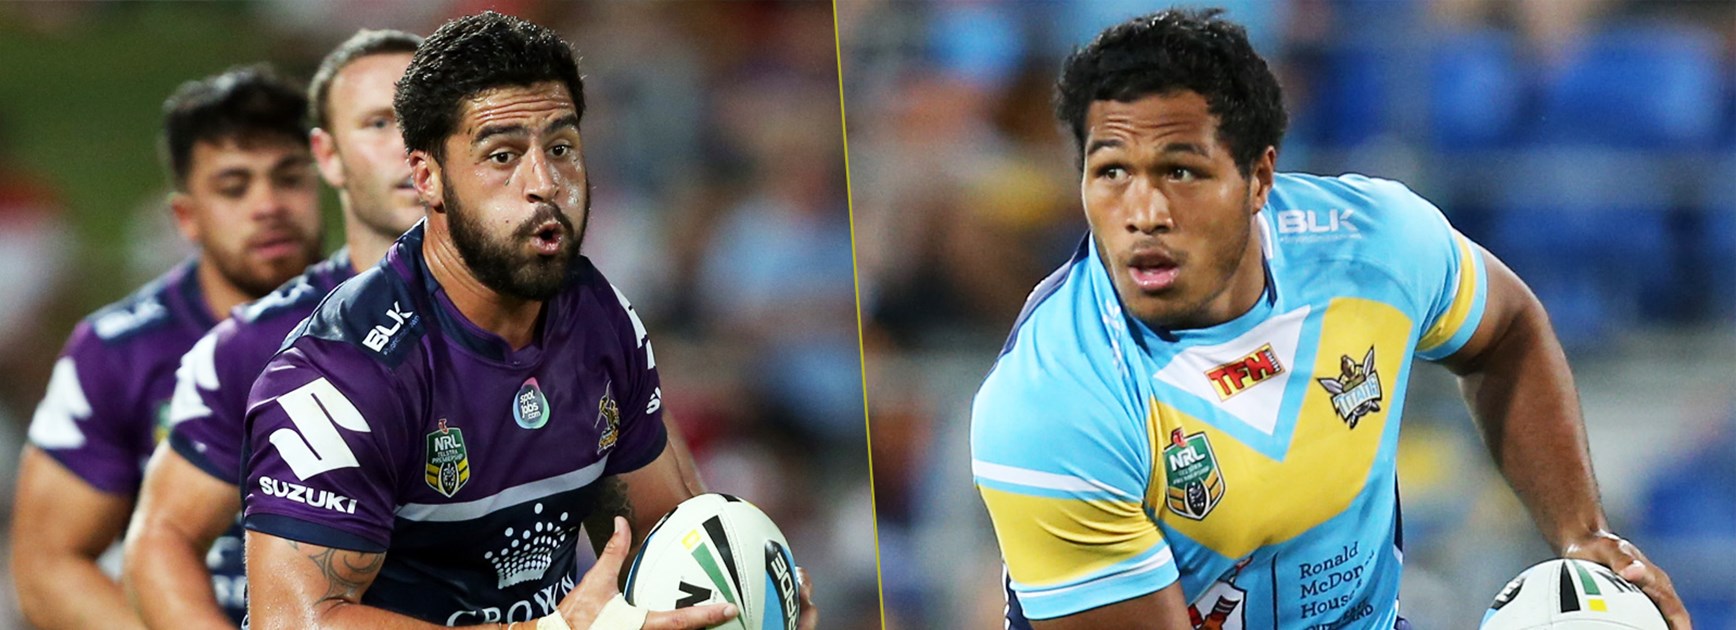 Taking on Kiwis prop and Storm star Jesse Bromwich will be a tough test for in-form Titans big man Agnatius Paasi.